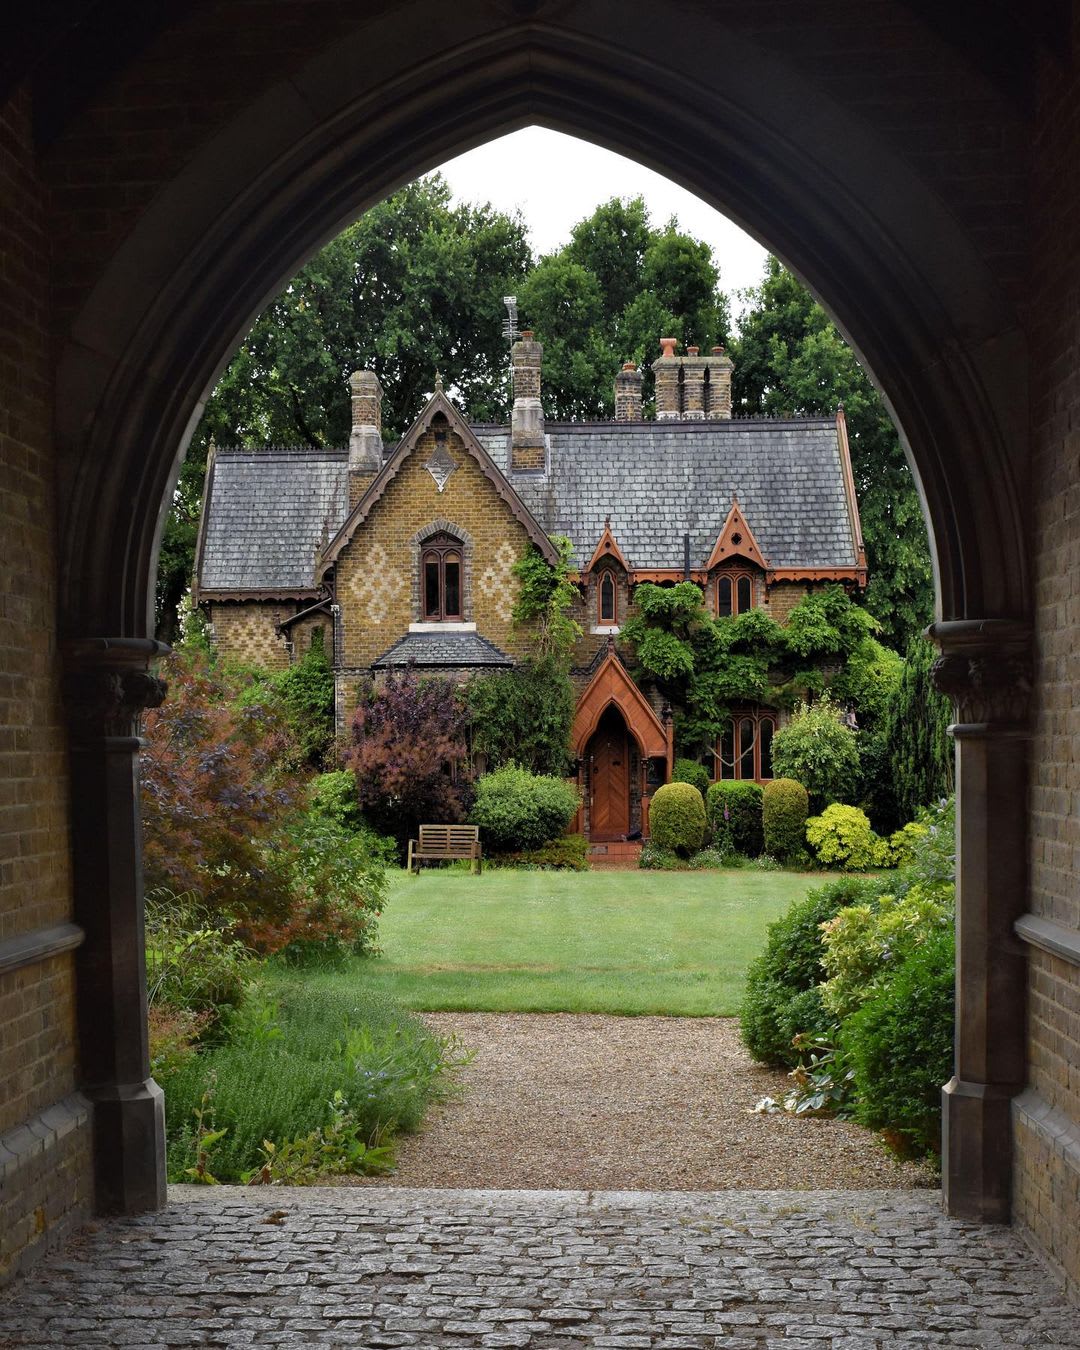 Victorian Gothic cottage beyond the arch of the gatehouse in Holly Village, Highgate, North London, UK.